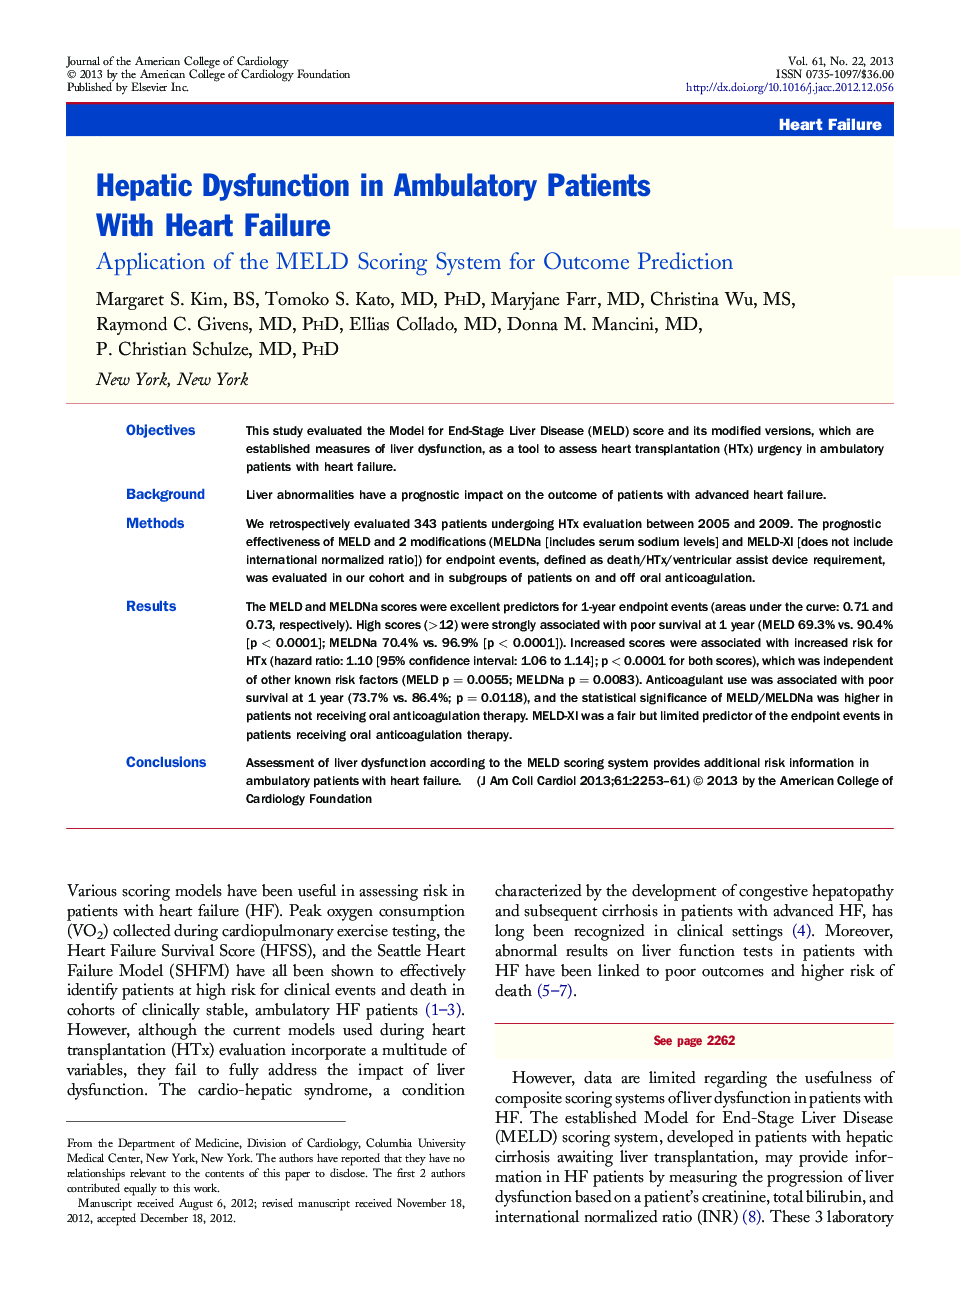 Hepatic Dysfunction in Ambulatory Patients With Heart Failure : Application of the MELD Scoring System for Outcome Prediction